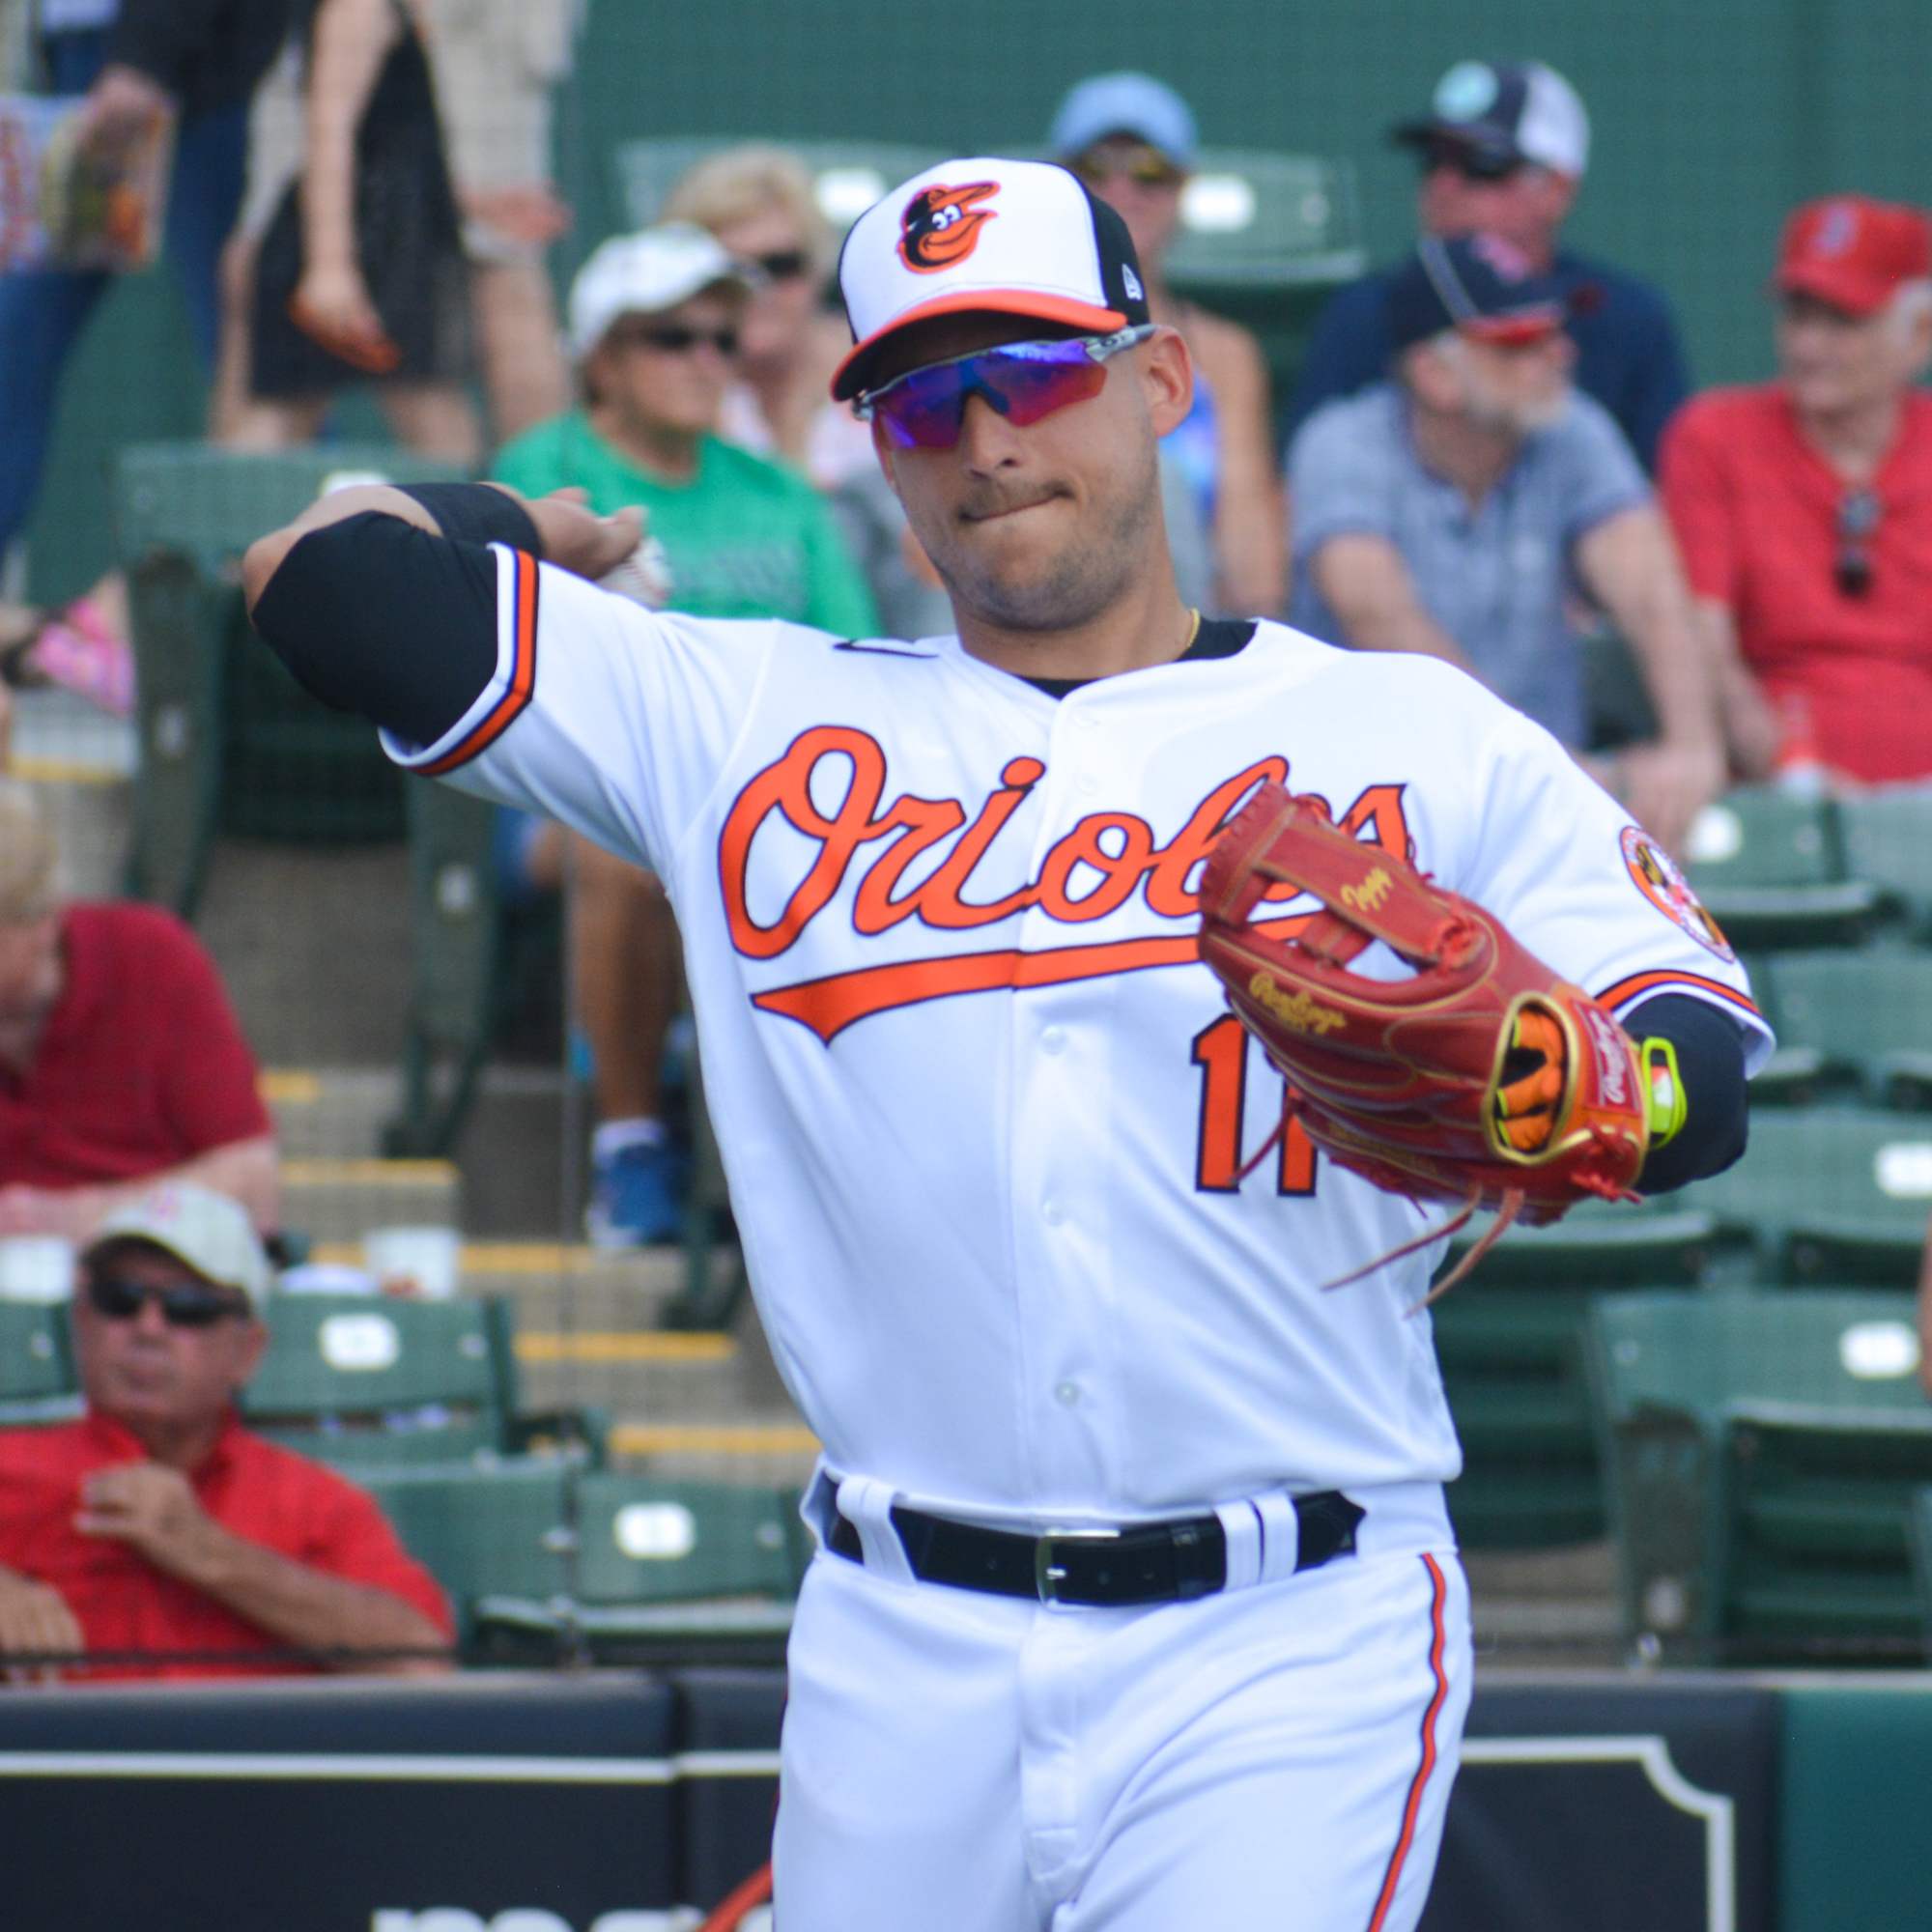 The Orioles signed shortstop Jose Iglesias during the offseason.